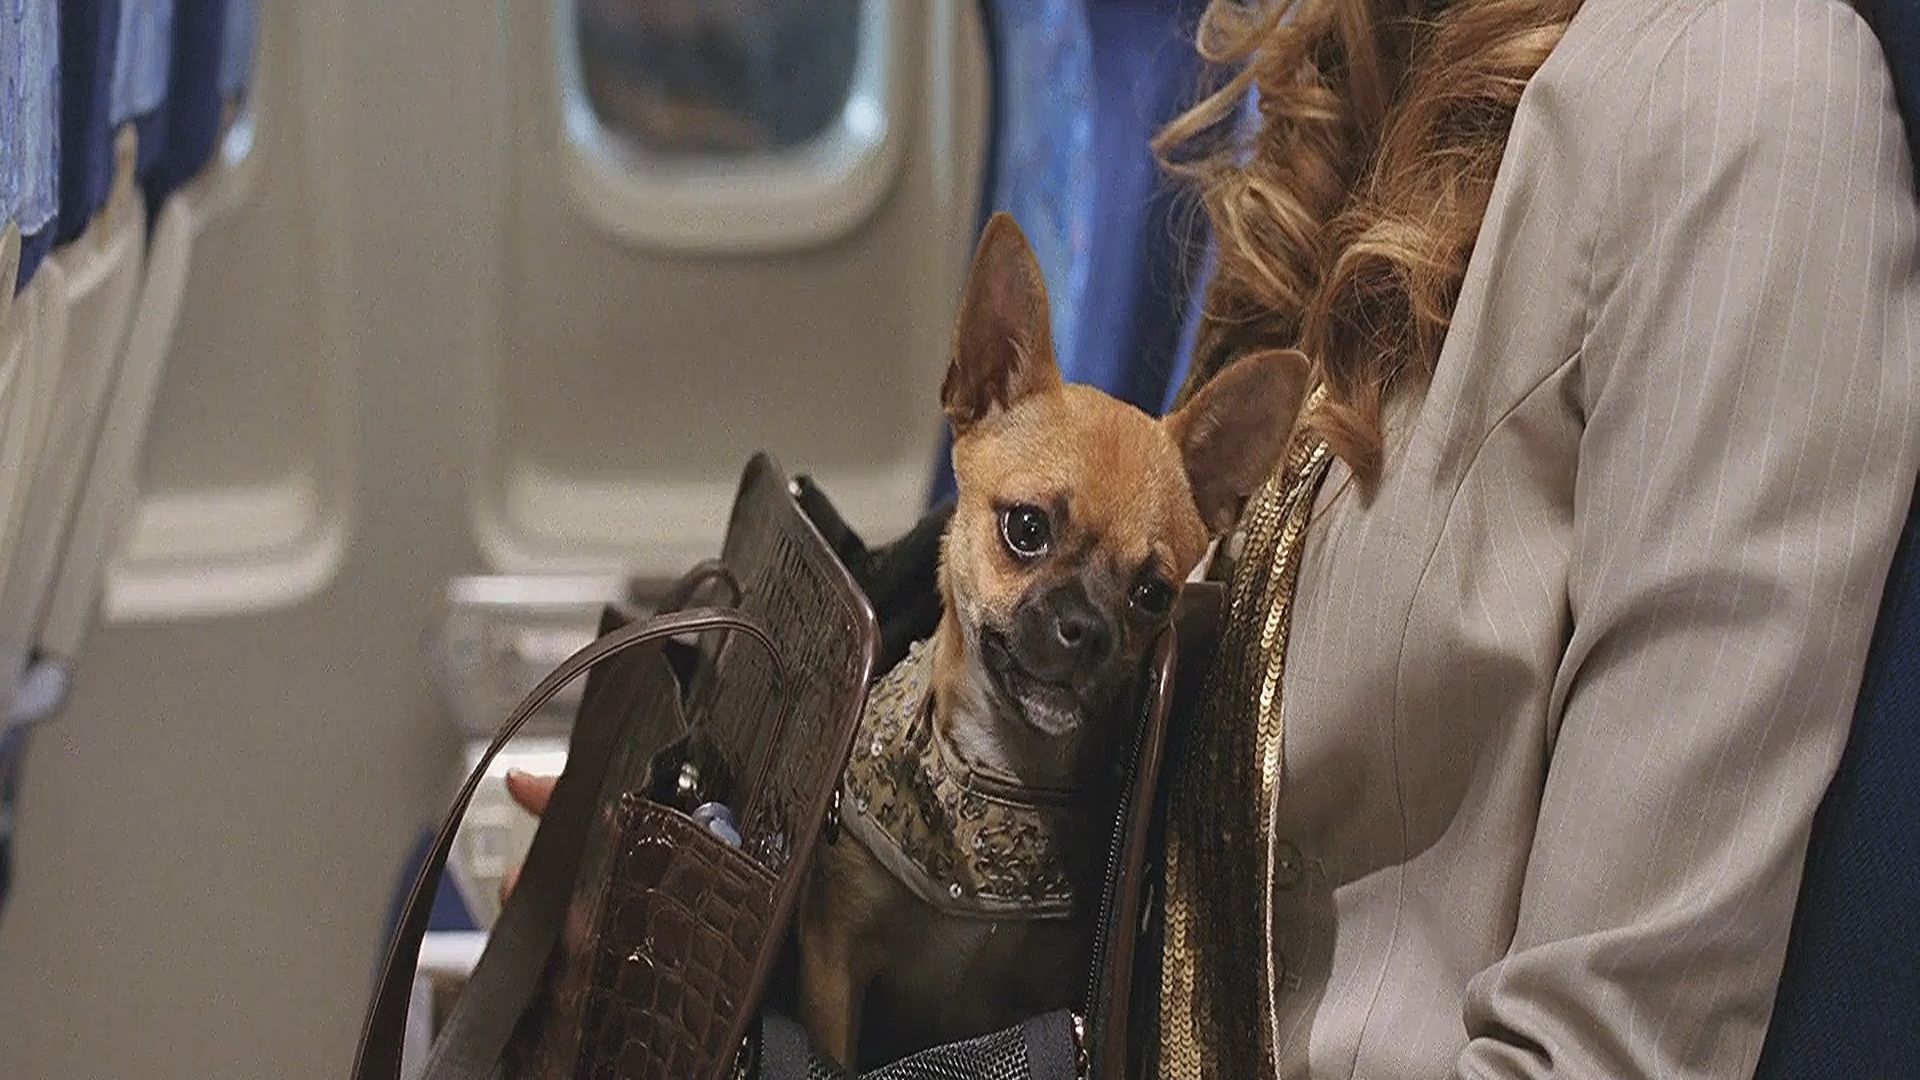 does the chihuahua die in snakes on a plane?